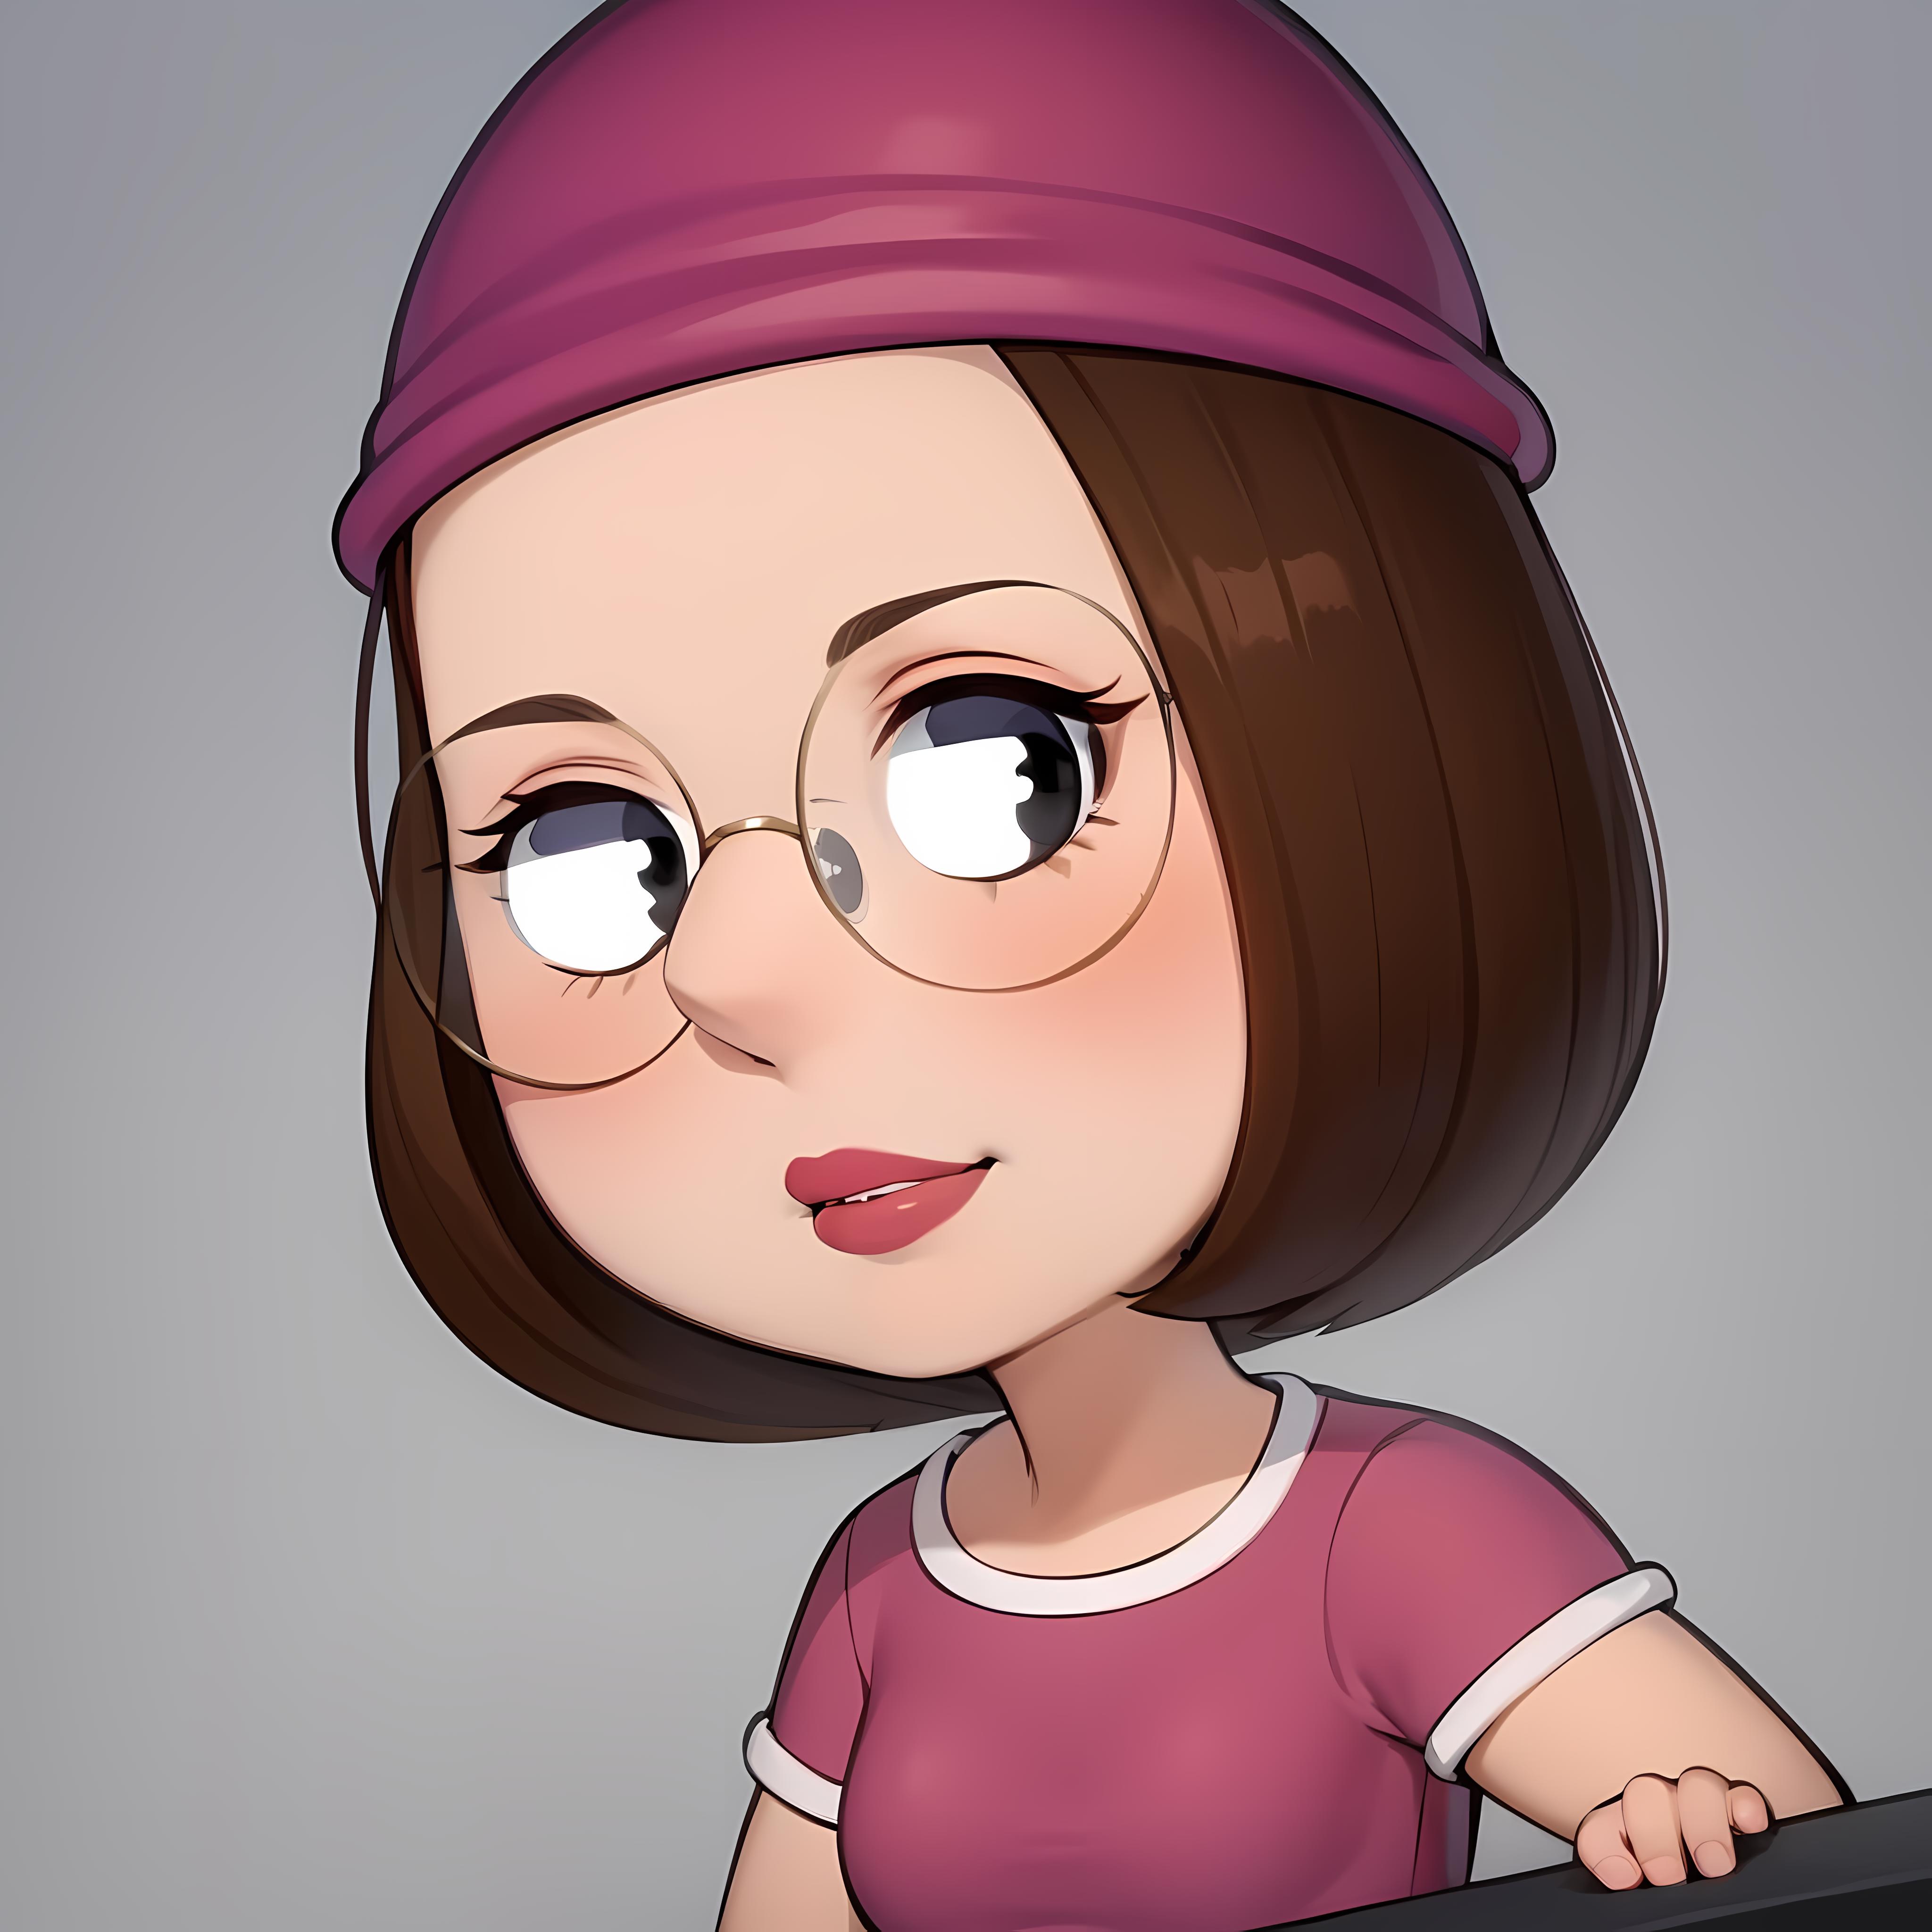 Meg griffin image by TheGooder